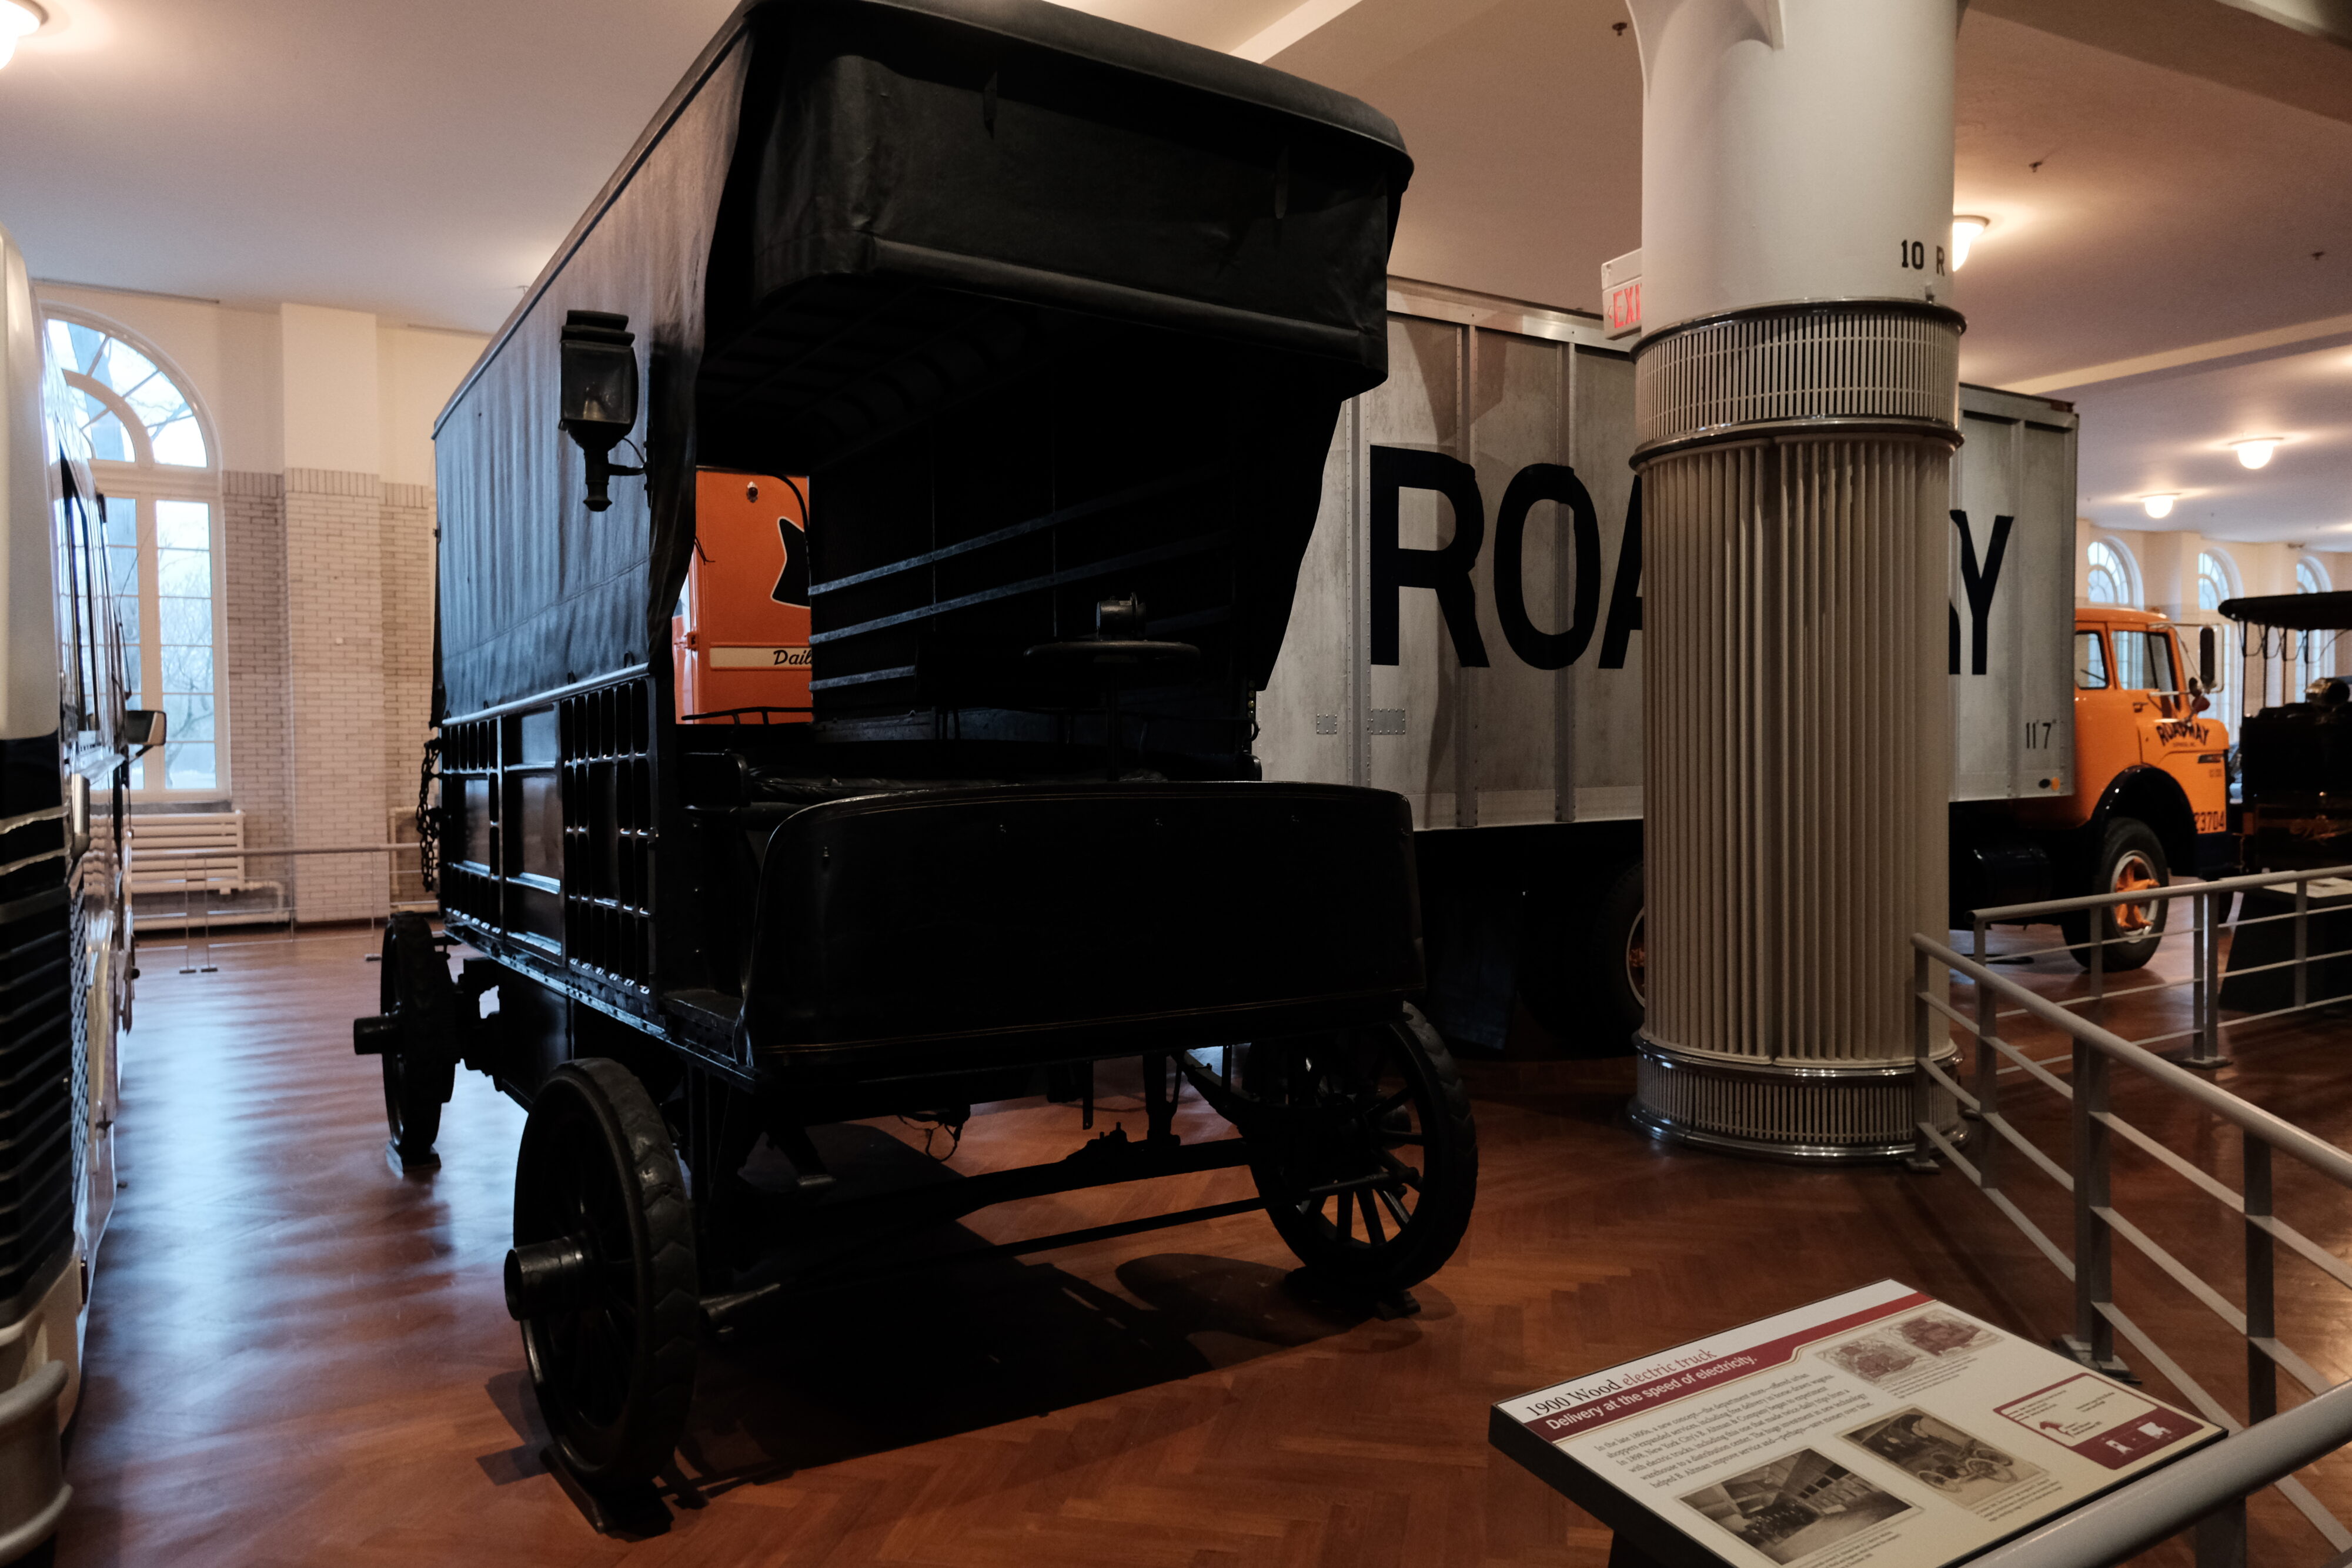 A 1900 wooden electric truck sits in a museum floorspace. 